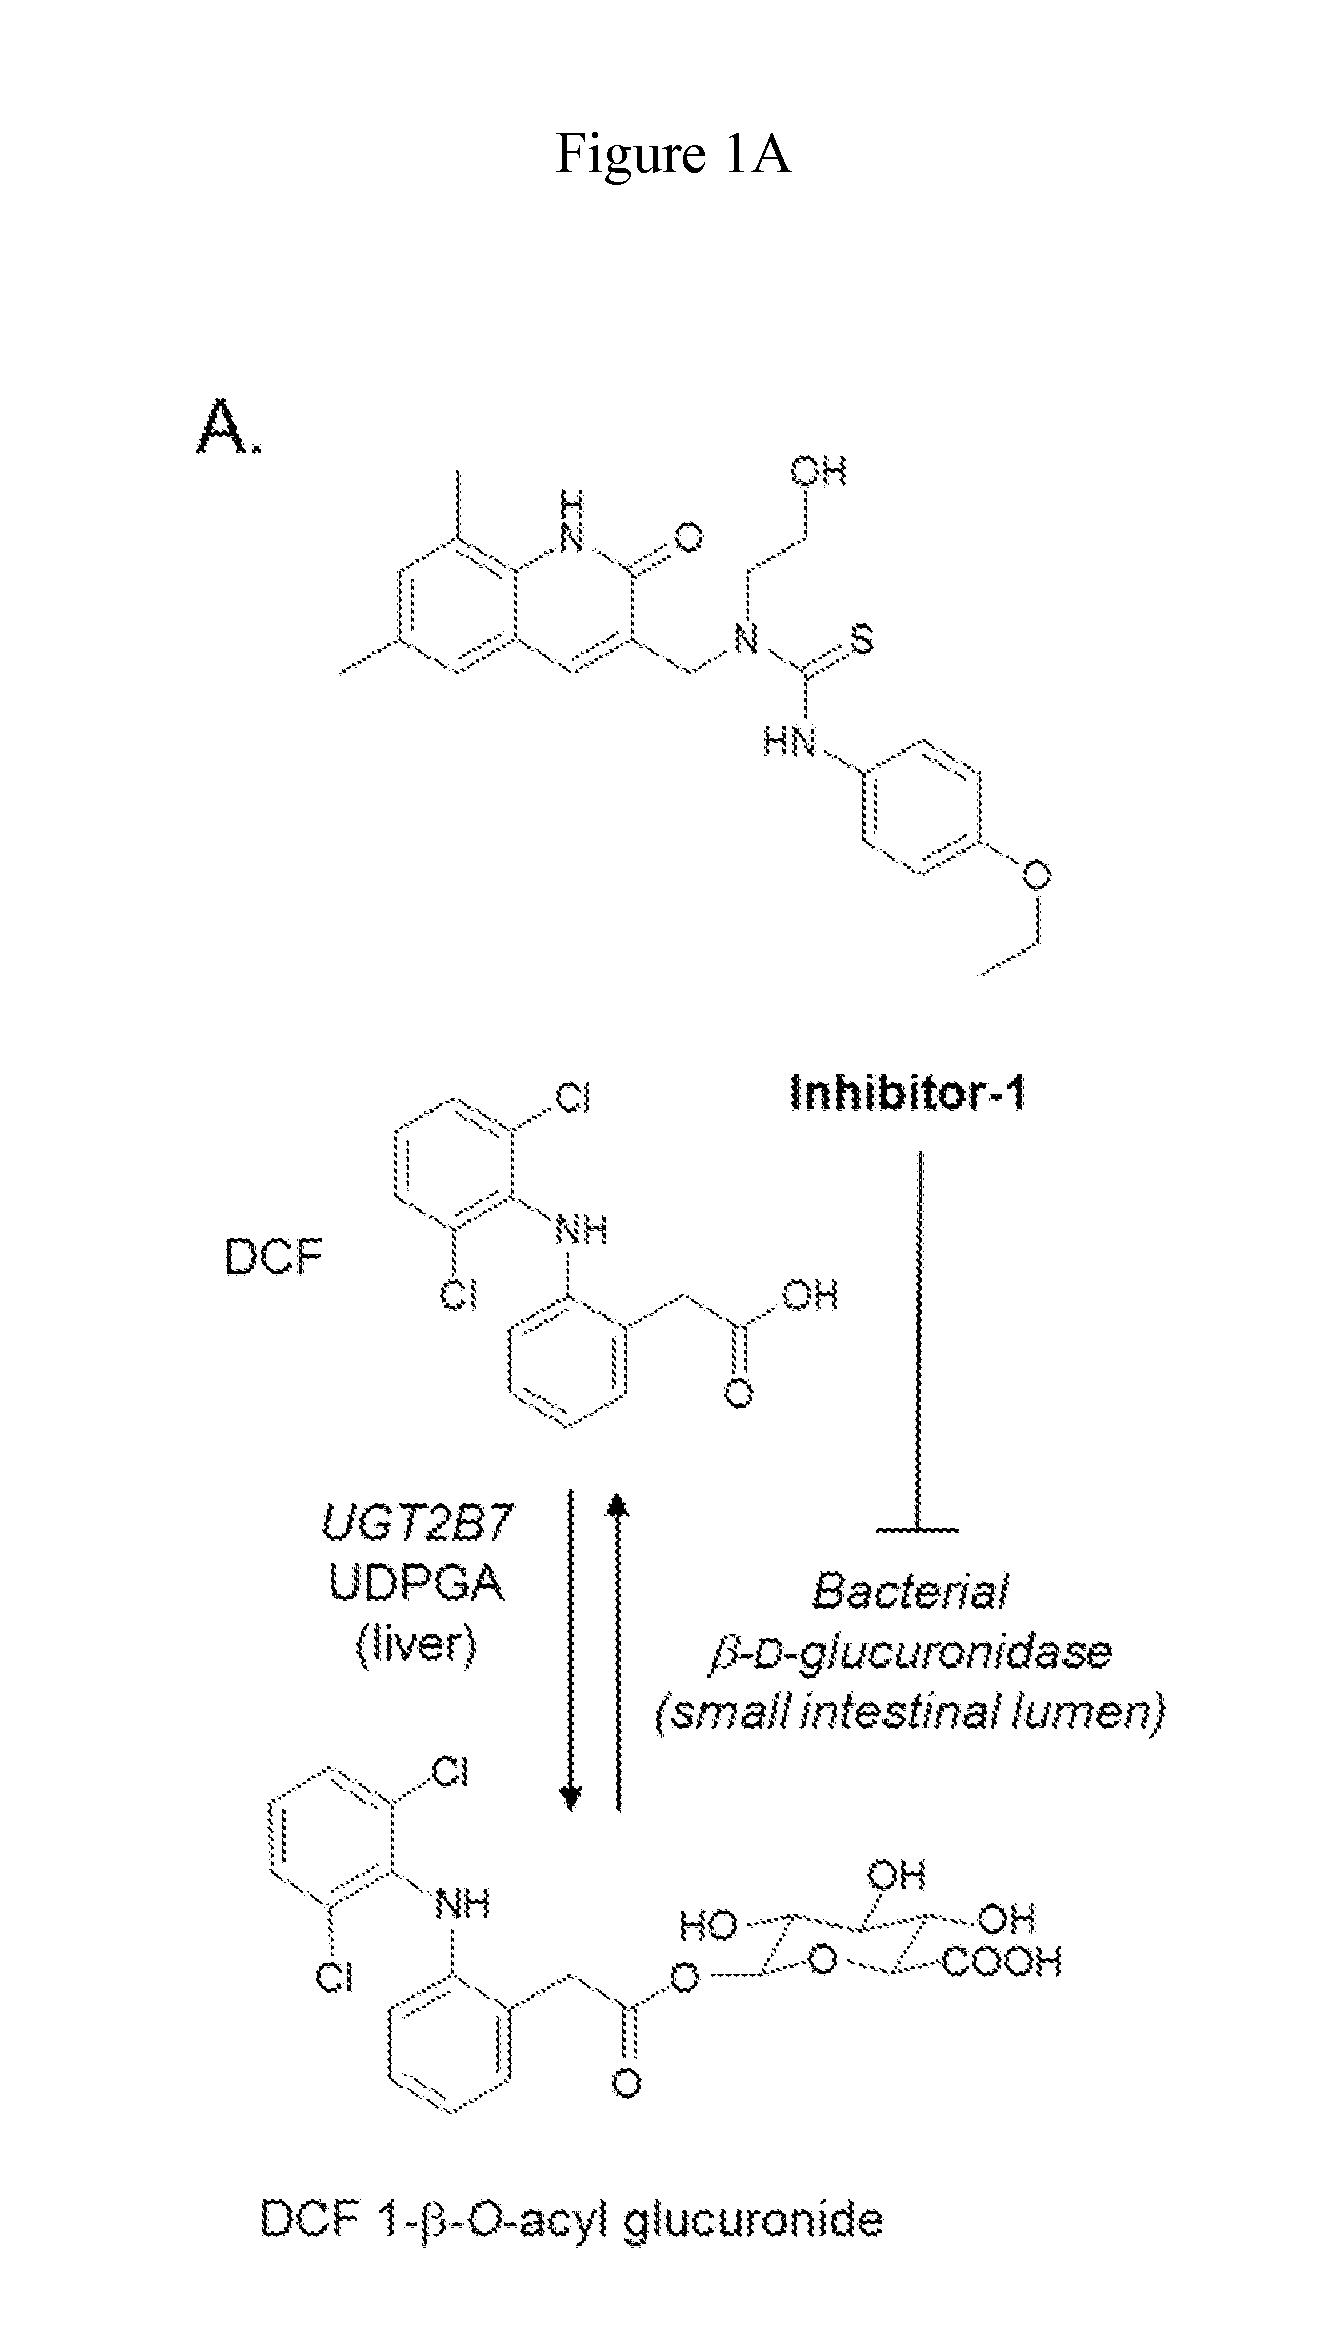 Methods of Treating Adverse Intestinal Effects of Non-Steroidal Anti-Inflammatory Drugs